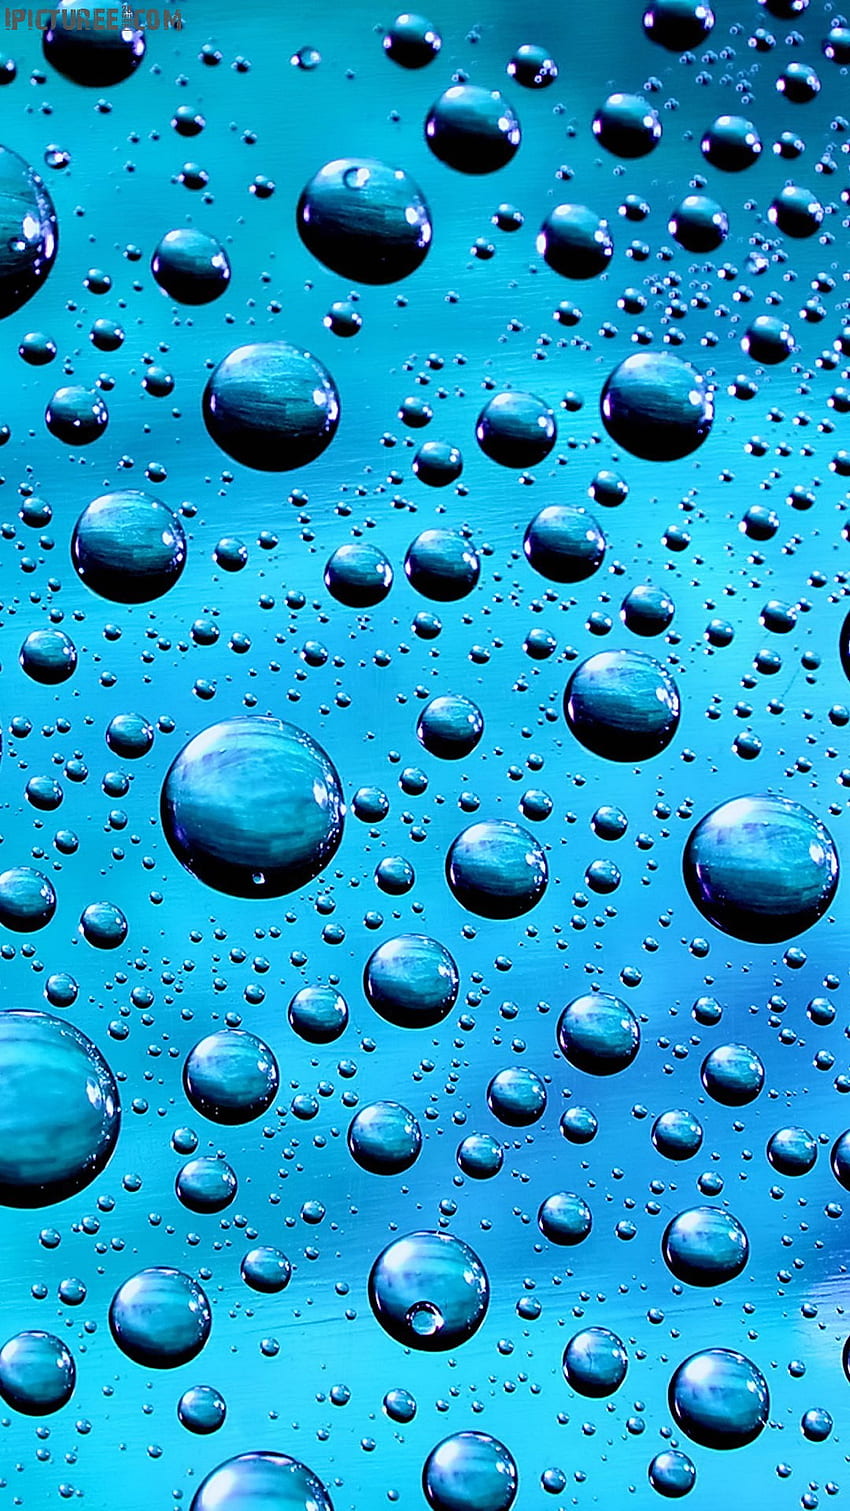 Water HD Wallpapers & Images in 4k & 8k resolution